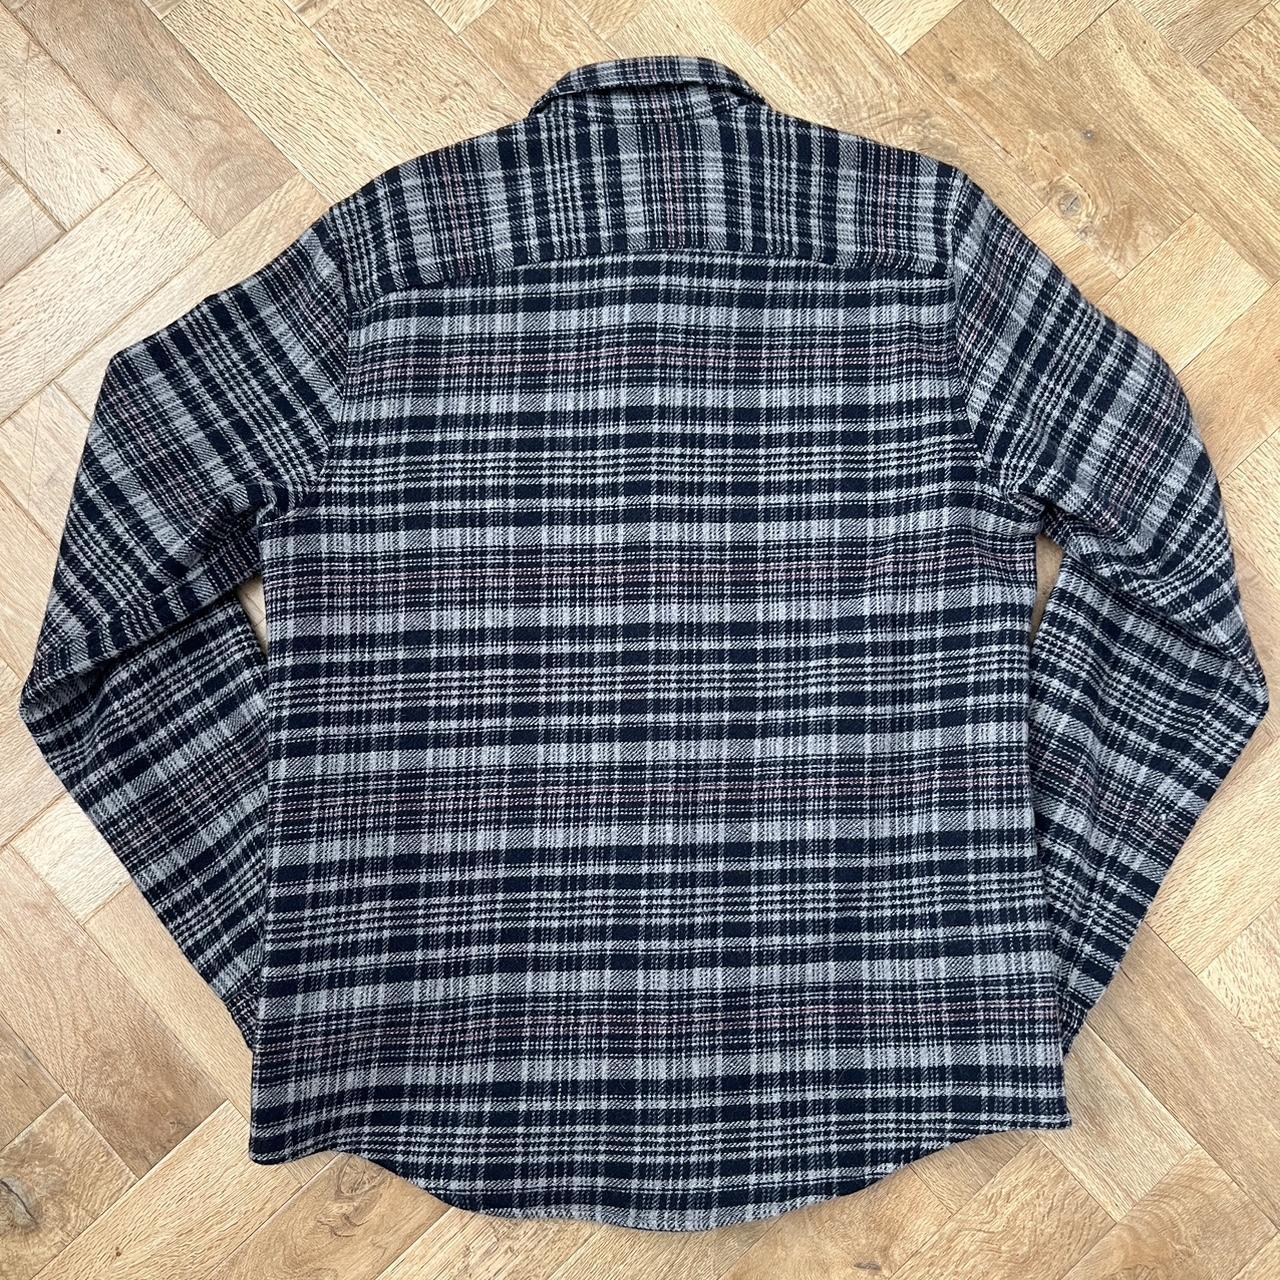 A.P.C. flannel shirt in size medium. Made in a... - Depop